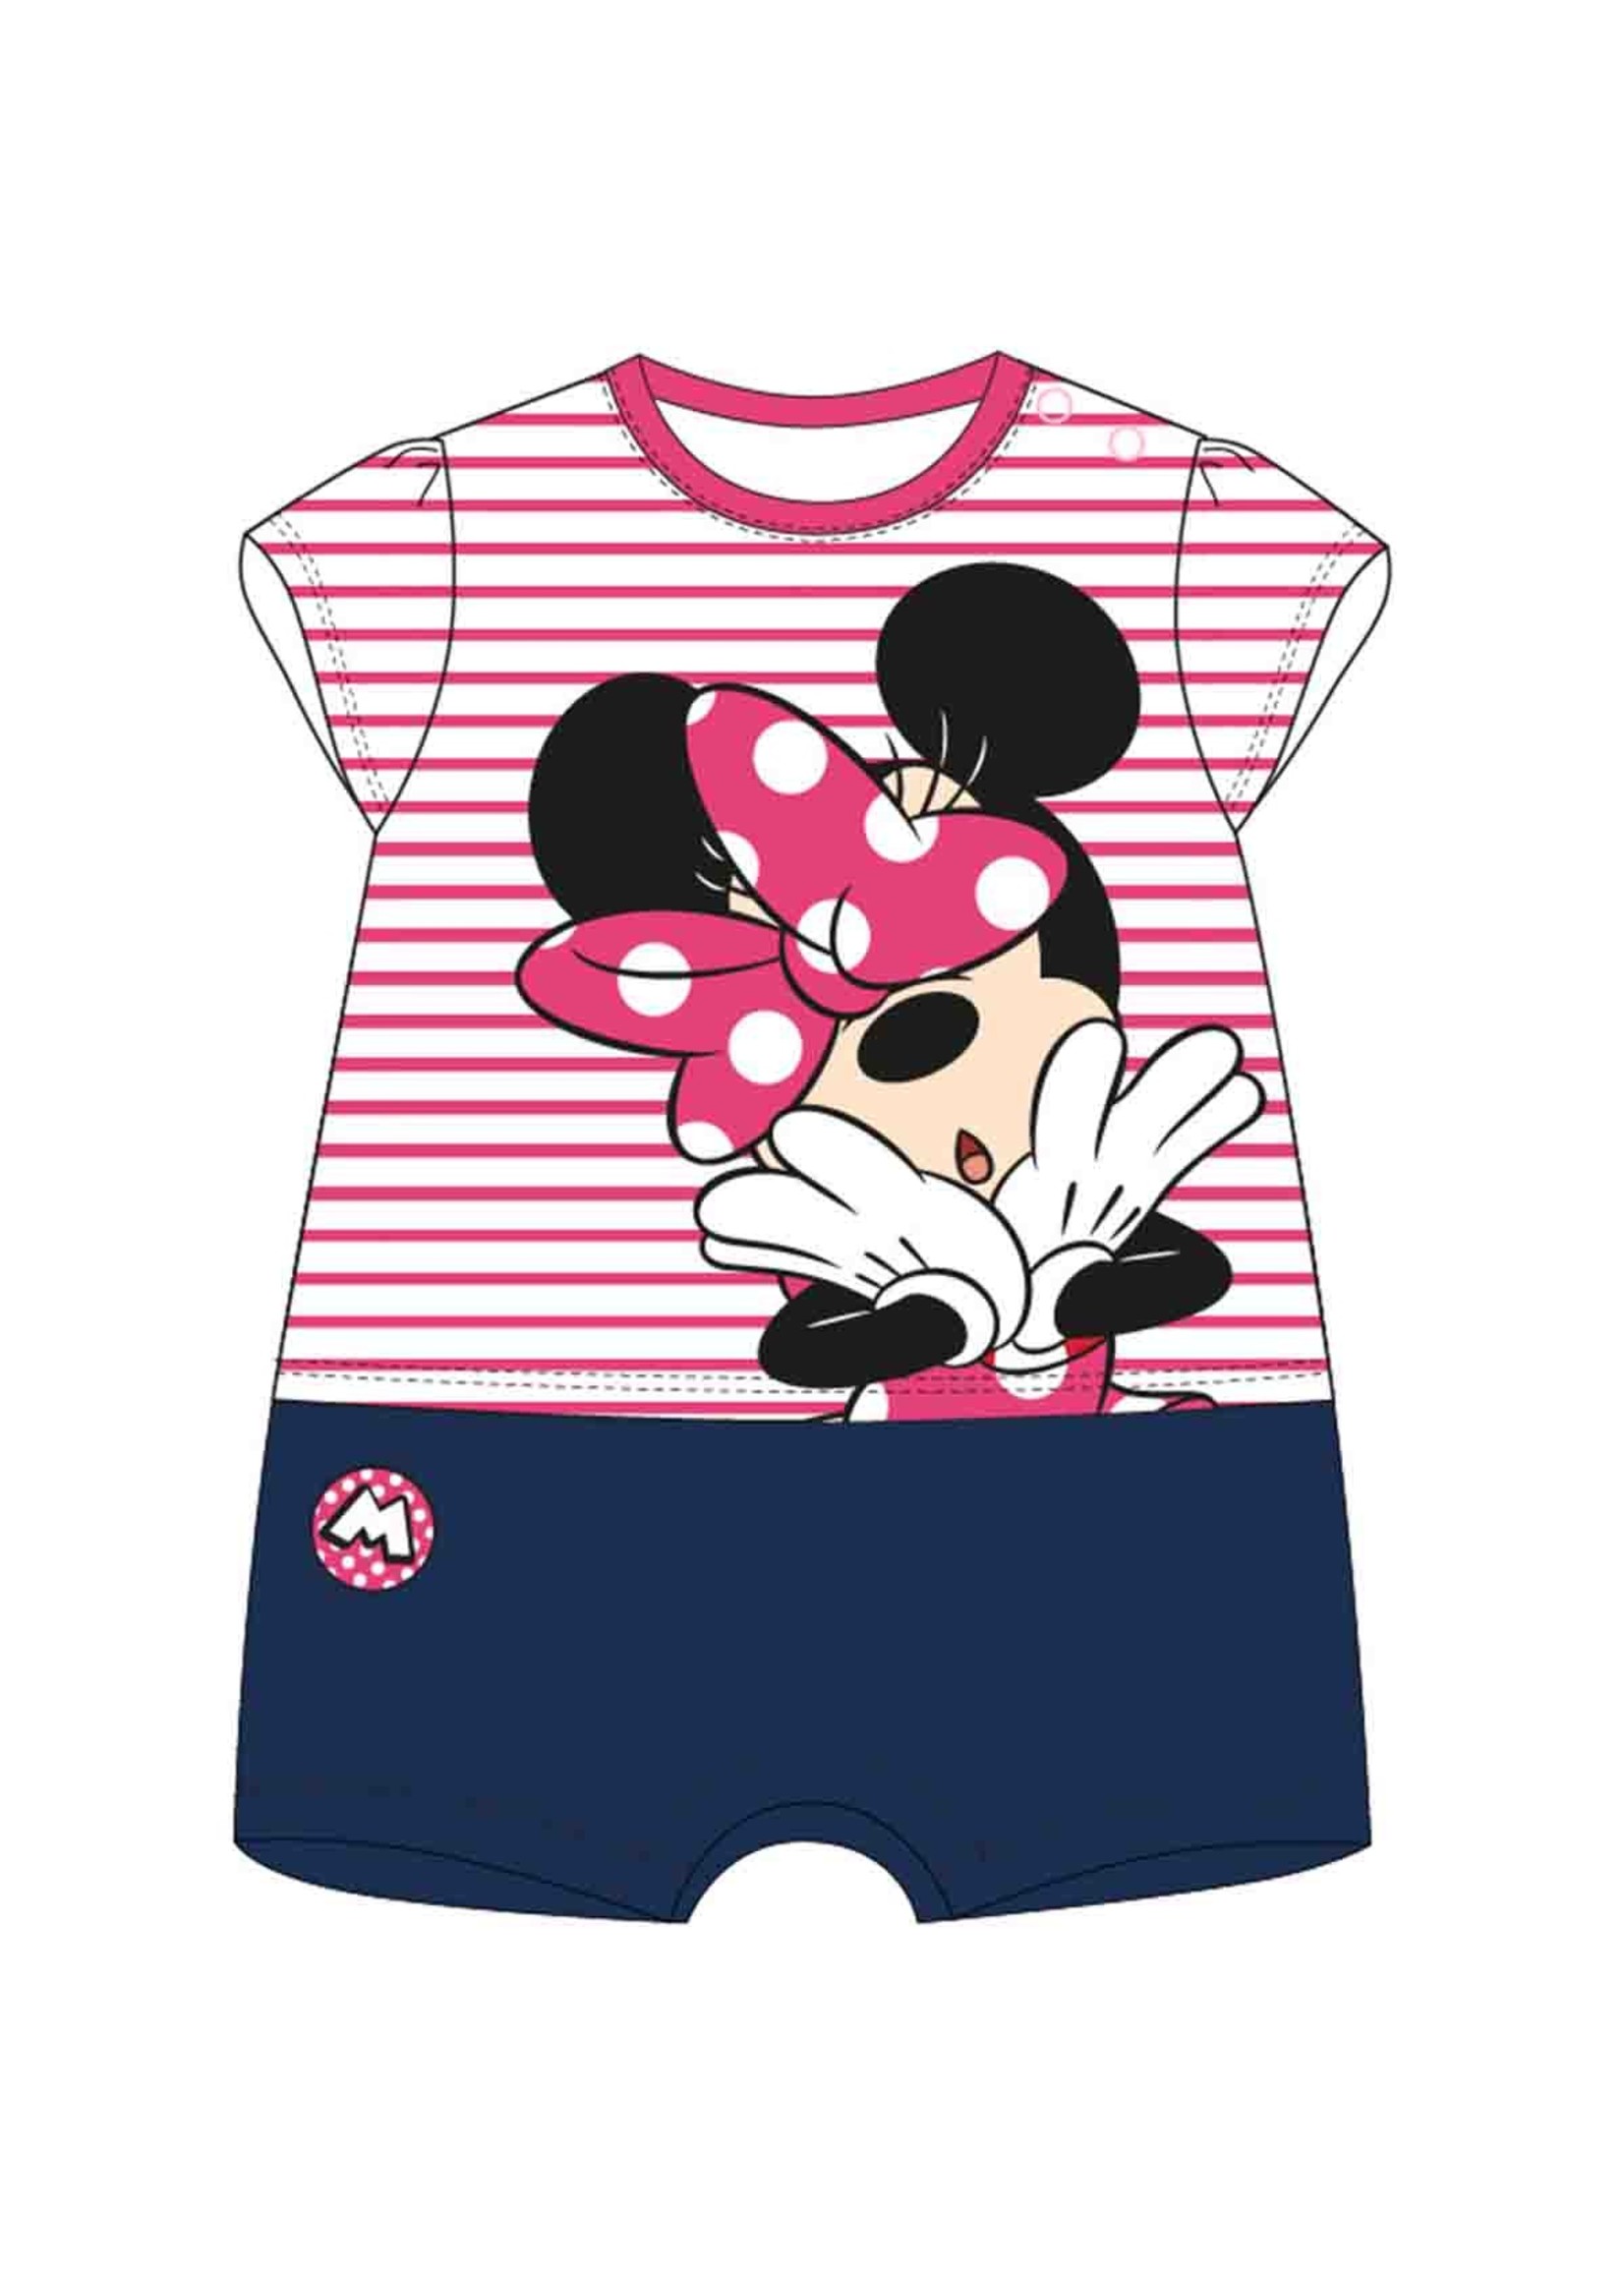 Disney baby Minnie Mouse romper from Disney baby black